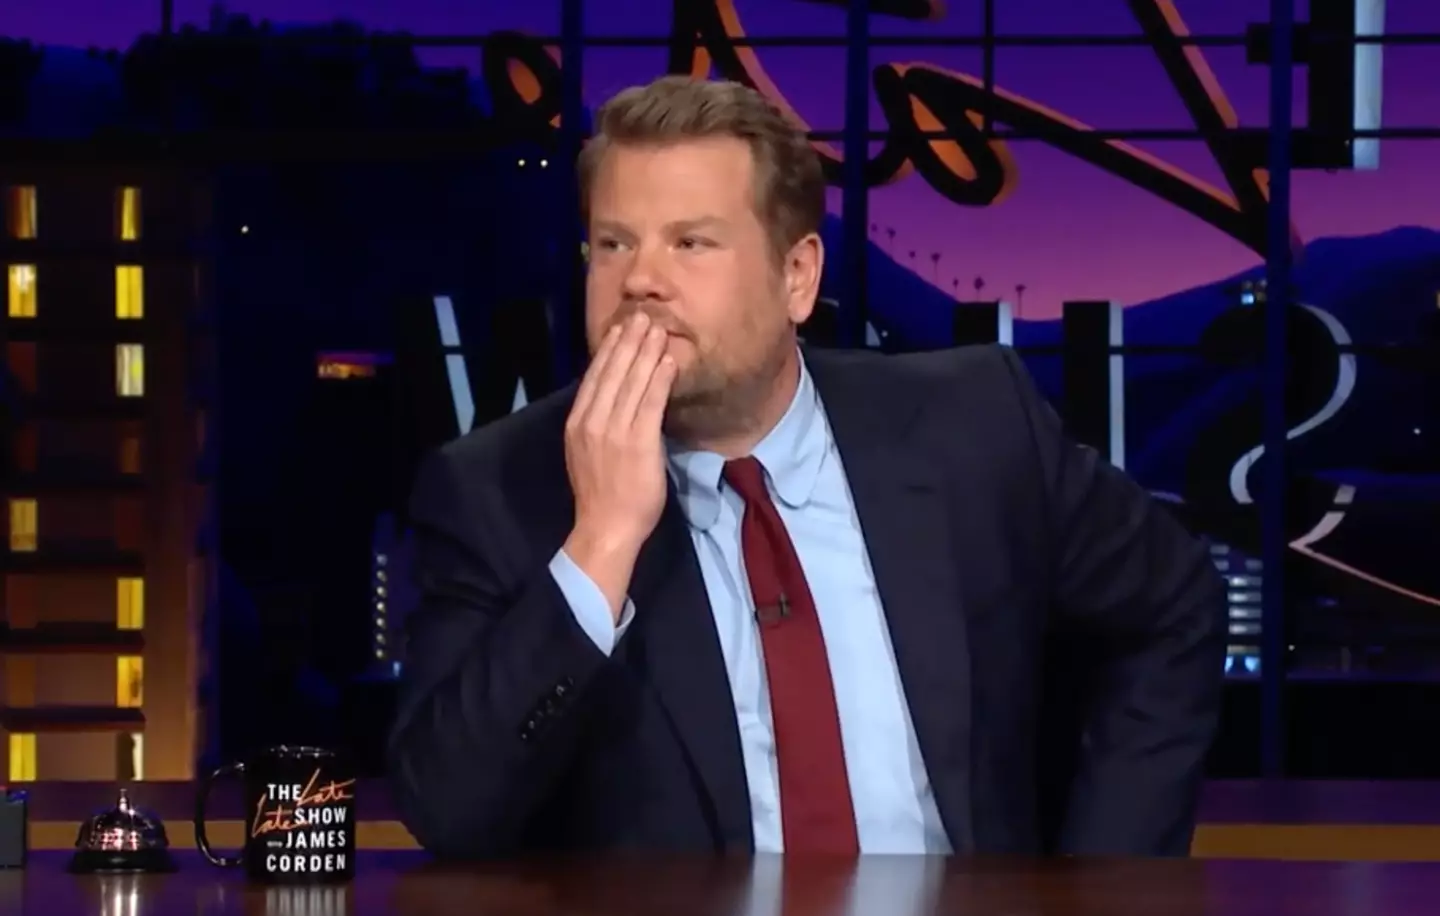 Corden was visibly emotional as he said goodbye to the show.